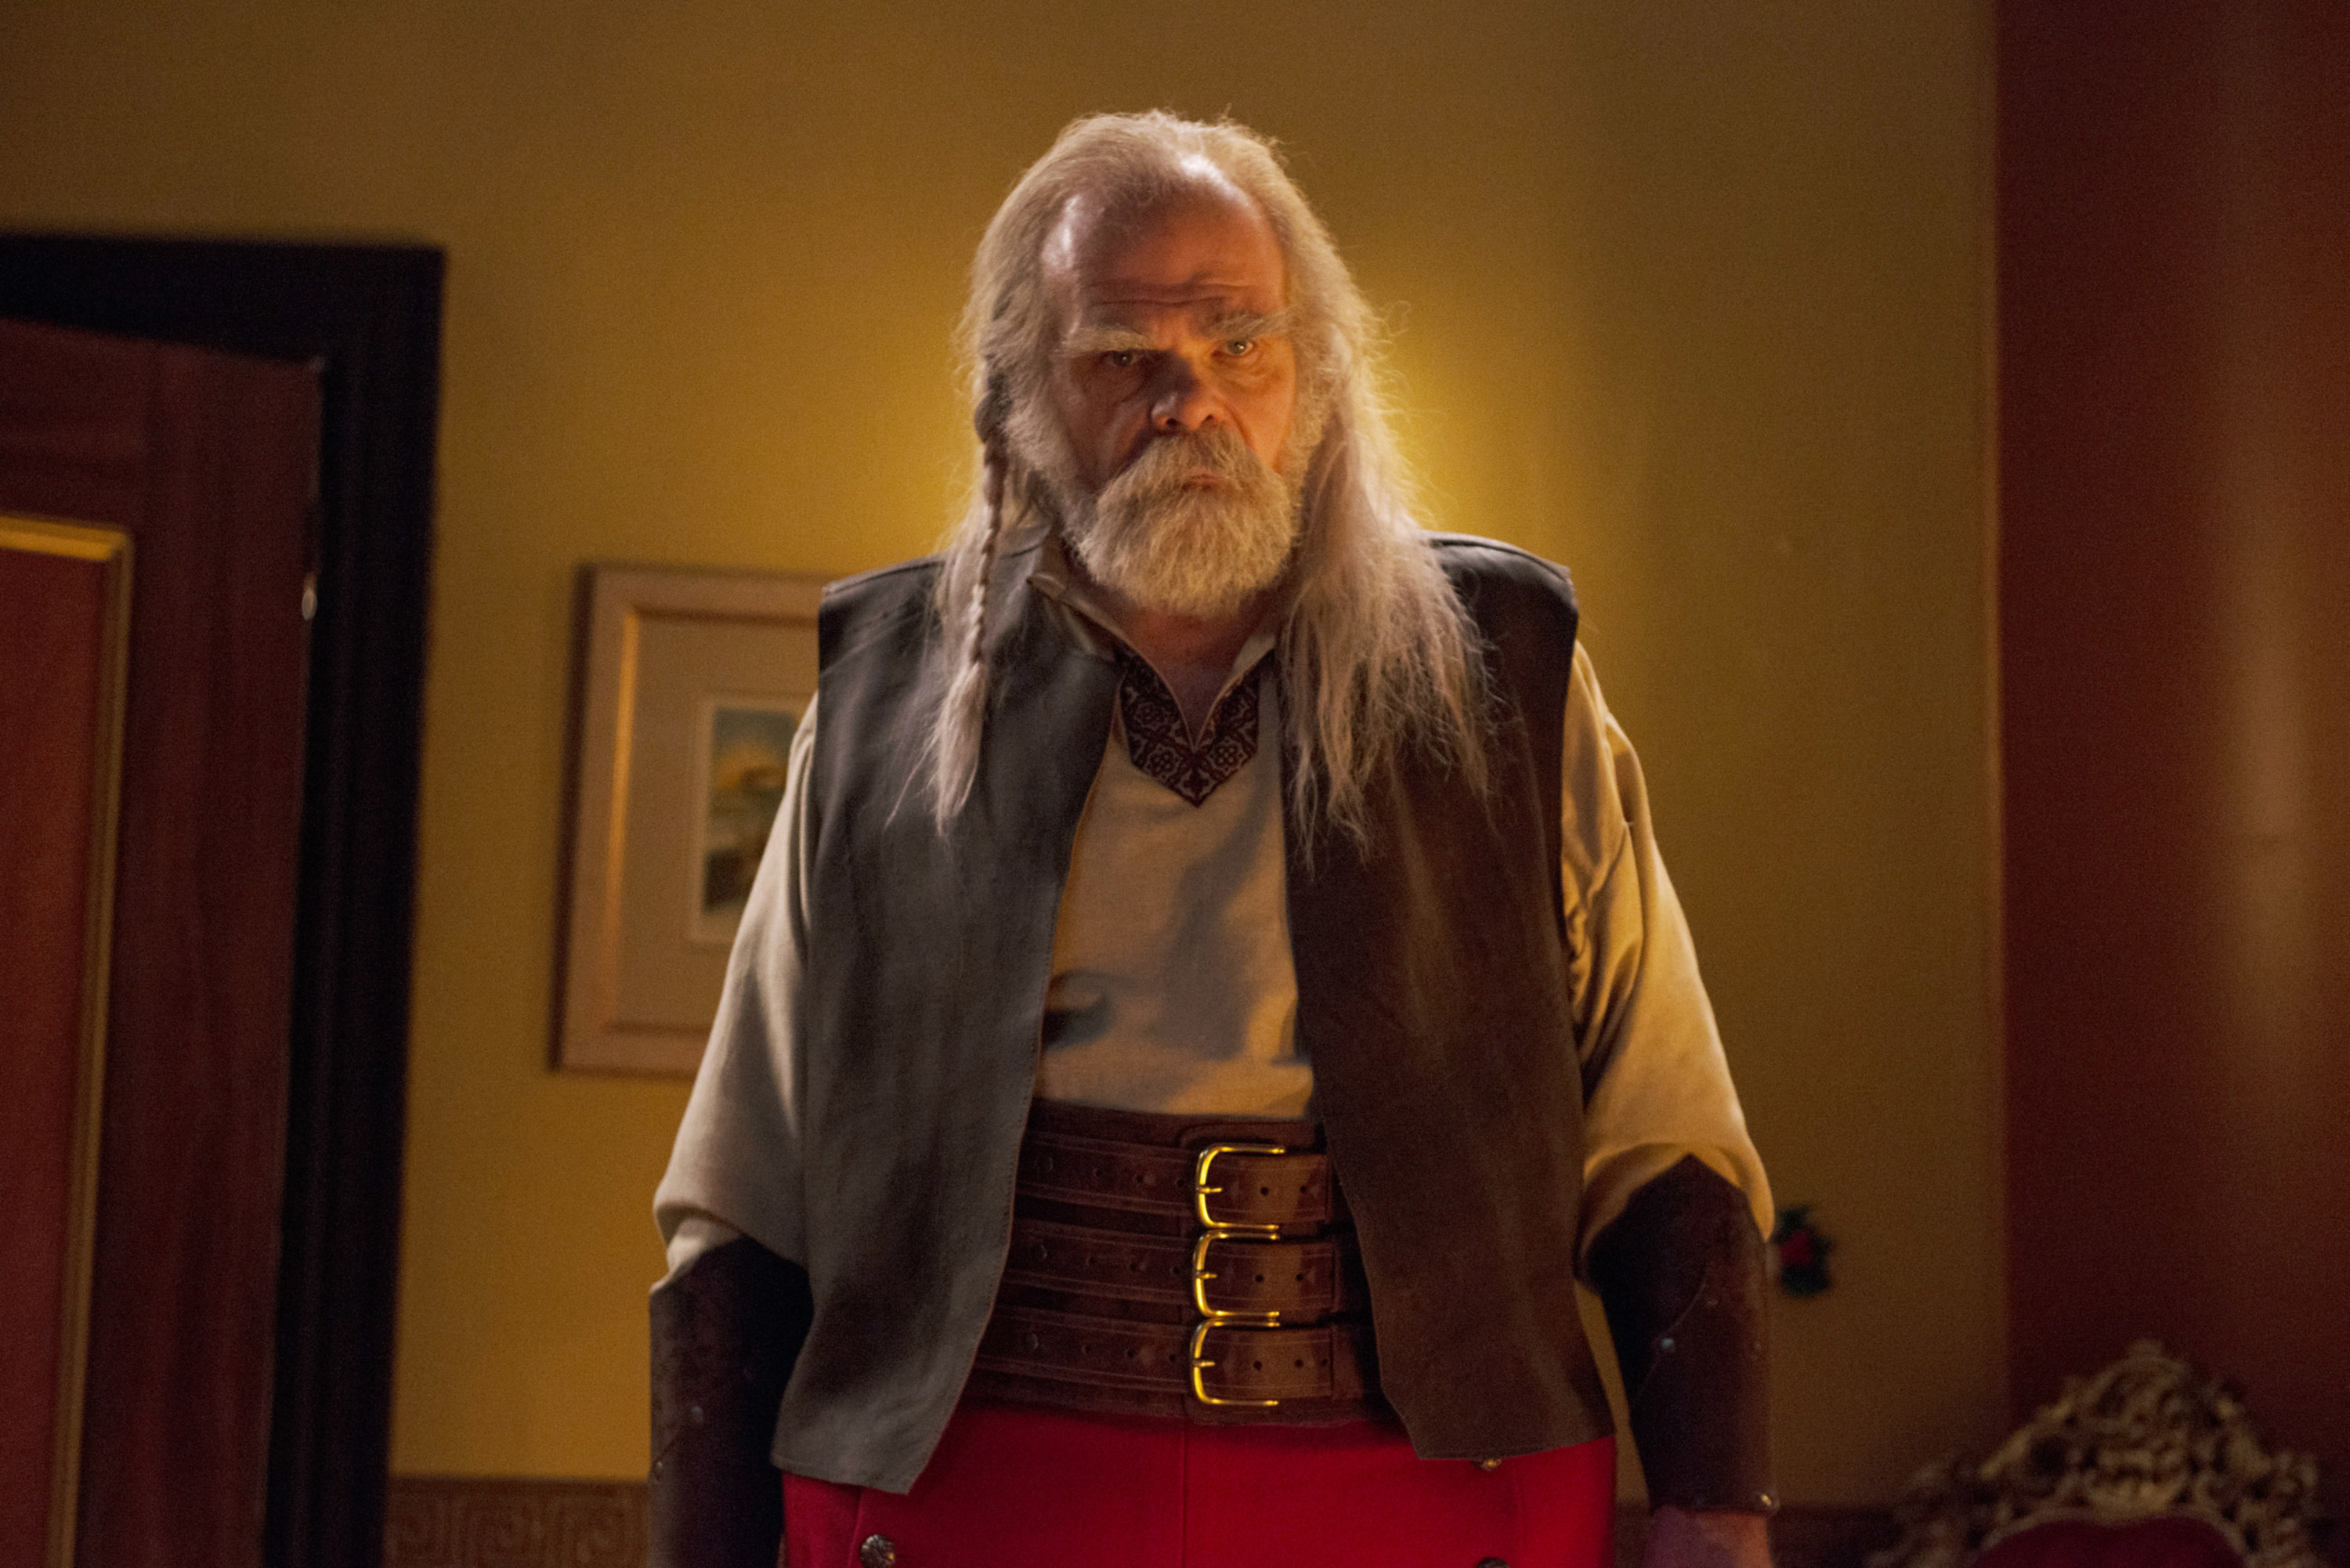 George Buza plays an edgier-looking Santa in the movie